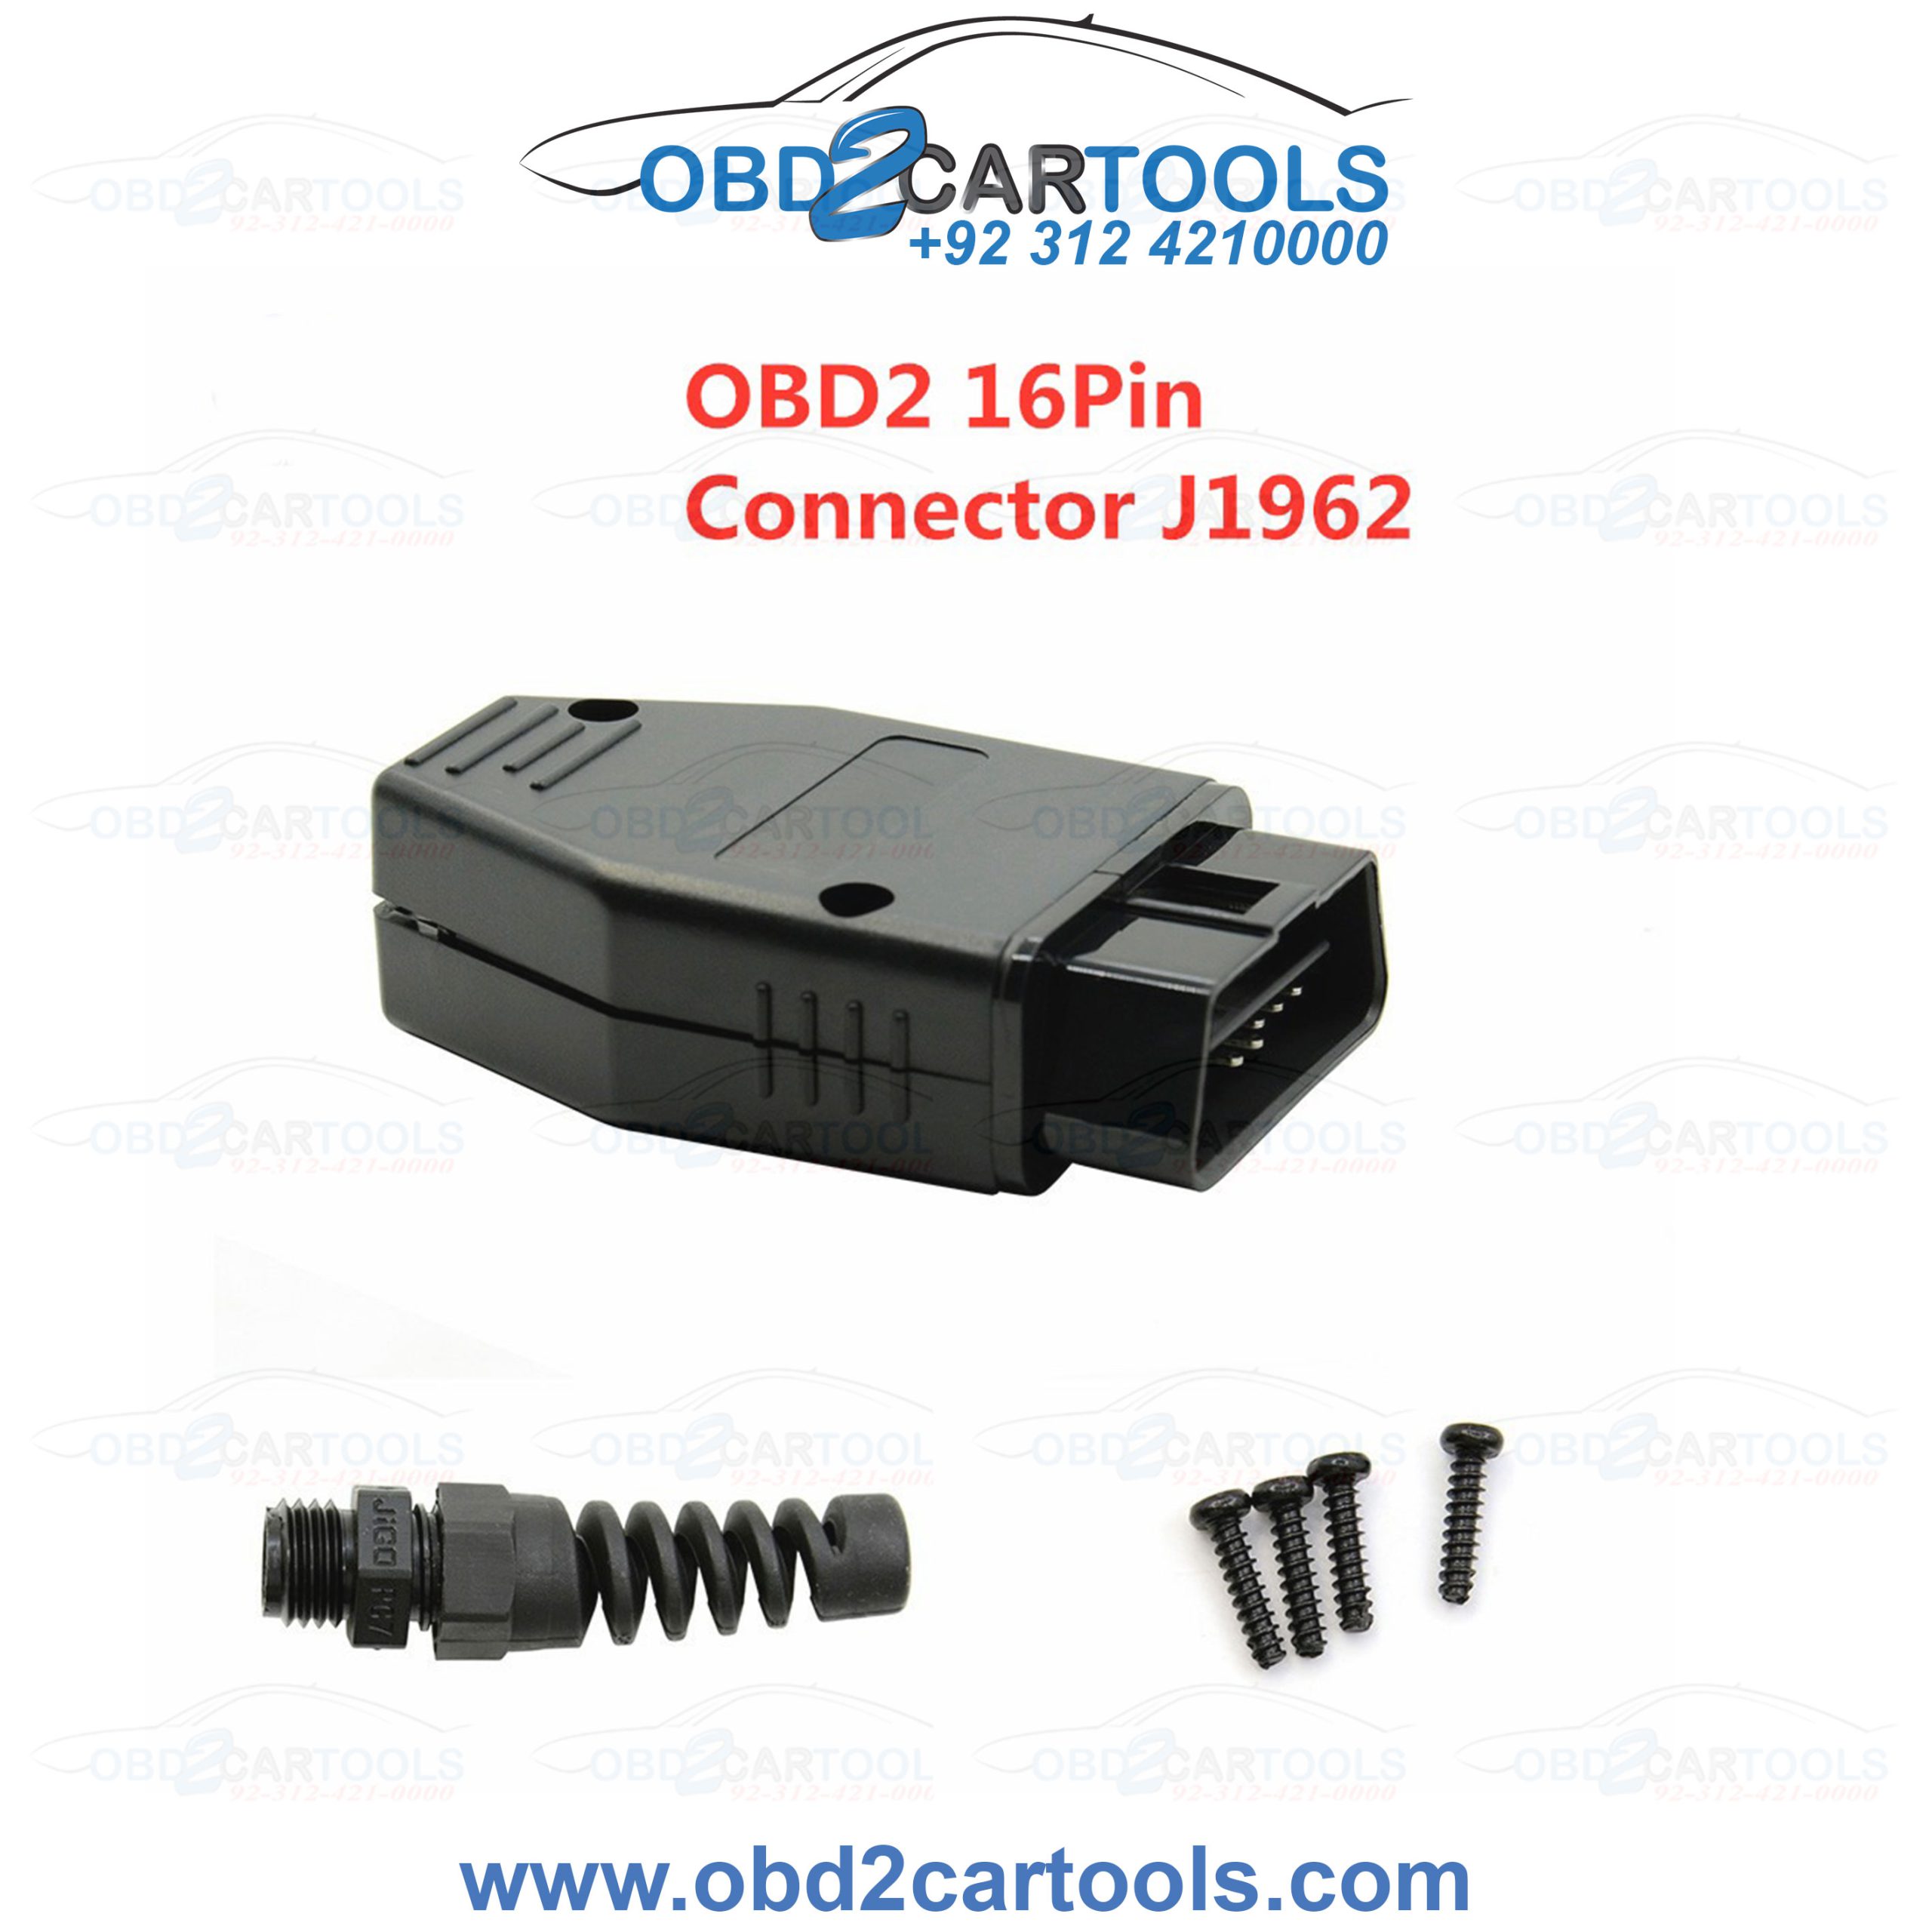 Product image for OBD2 16pin male connector J1962 Connector OBDII Plug with Screws Car Diagnostic Cable Connector